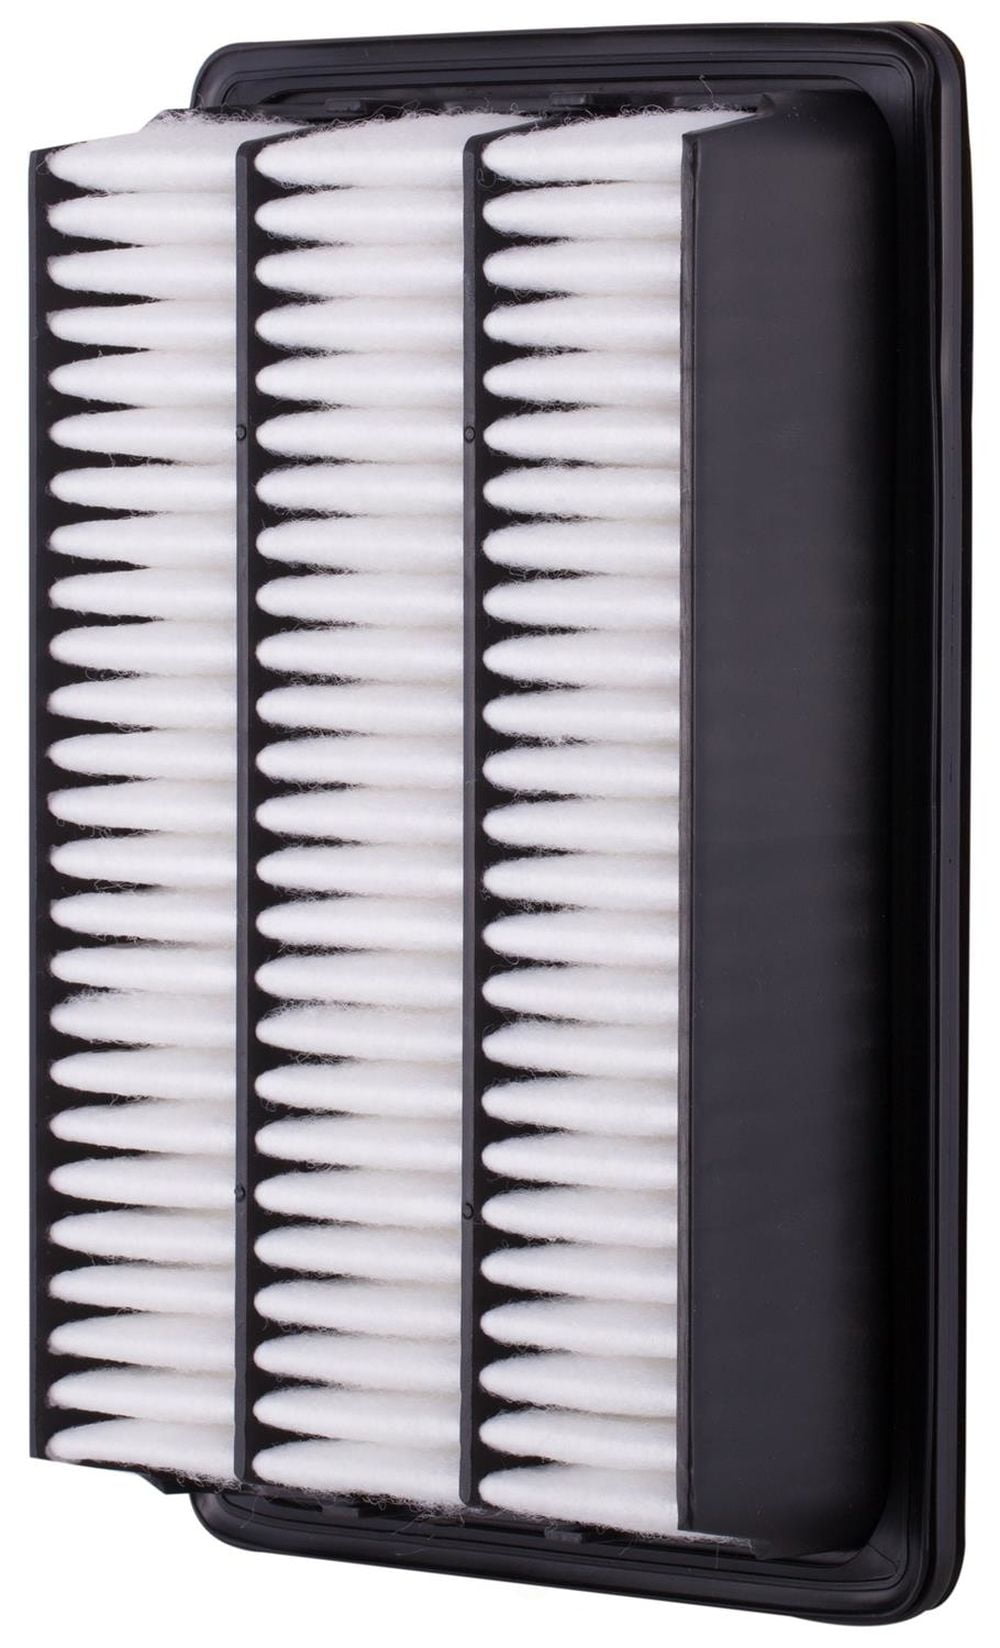 Airbrush Cabin Suction Cabin 3 Filter Couples abs-611 extra deep version 